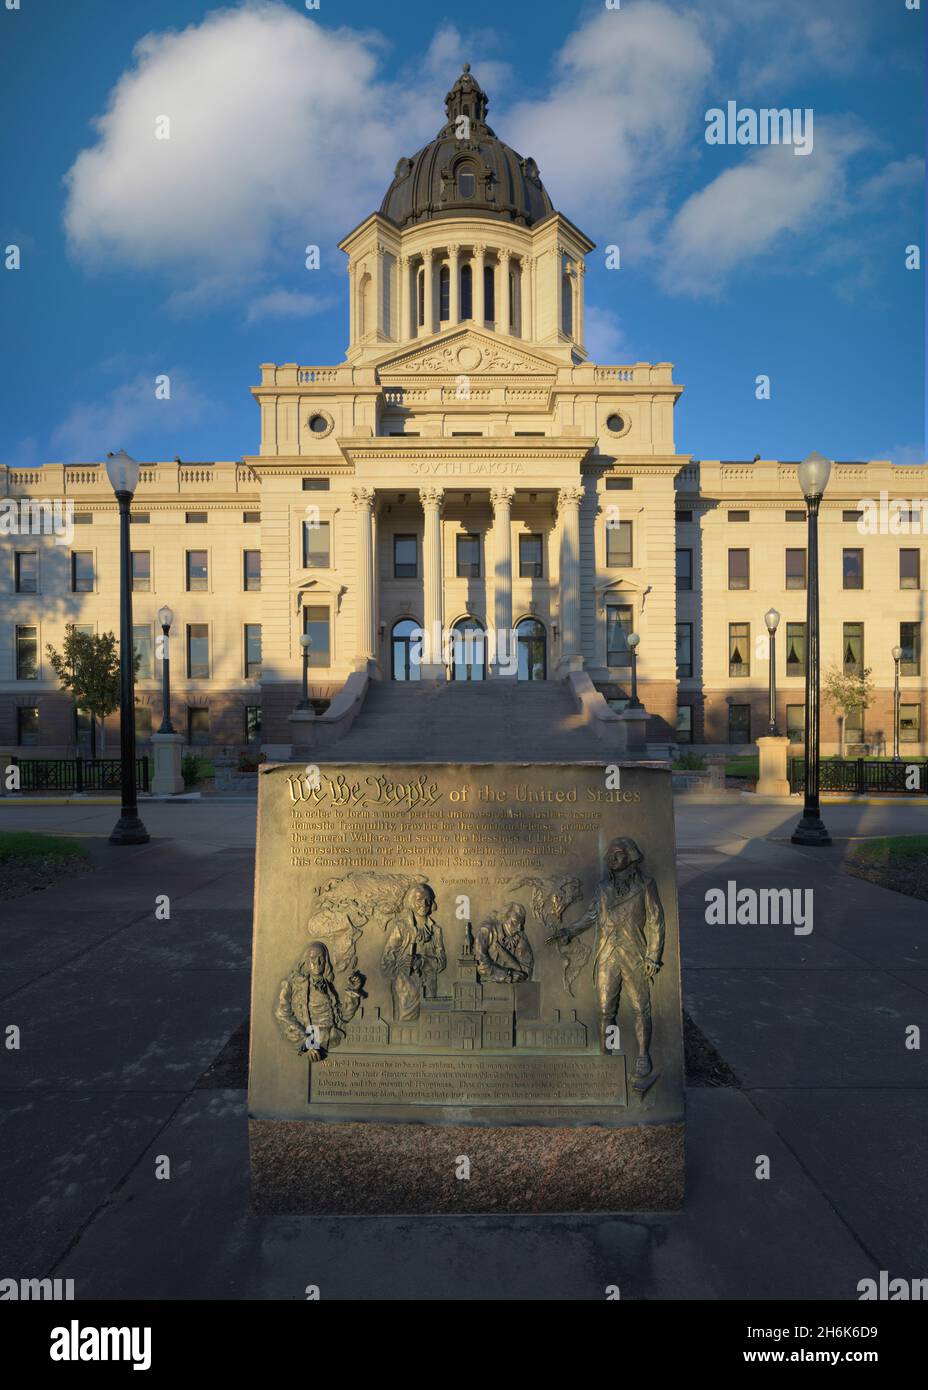 Bronze plaque in front of the South Dakota State Capitol building in Pierre, South Dakota Stock Photo